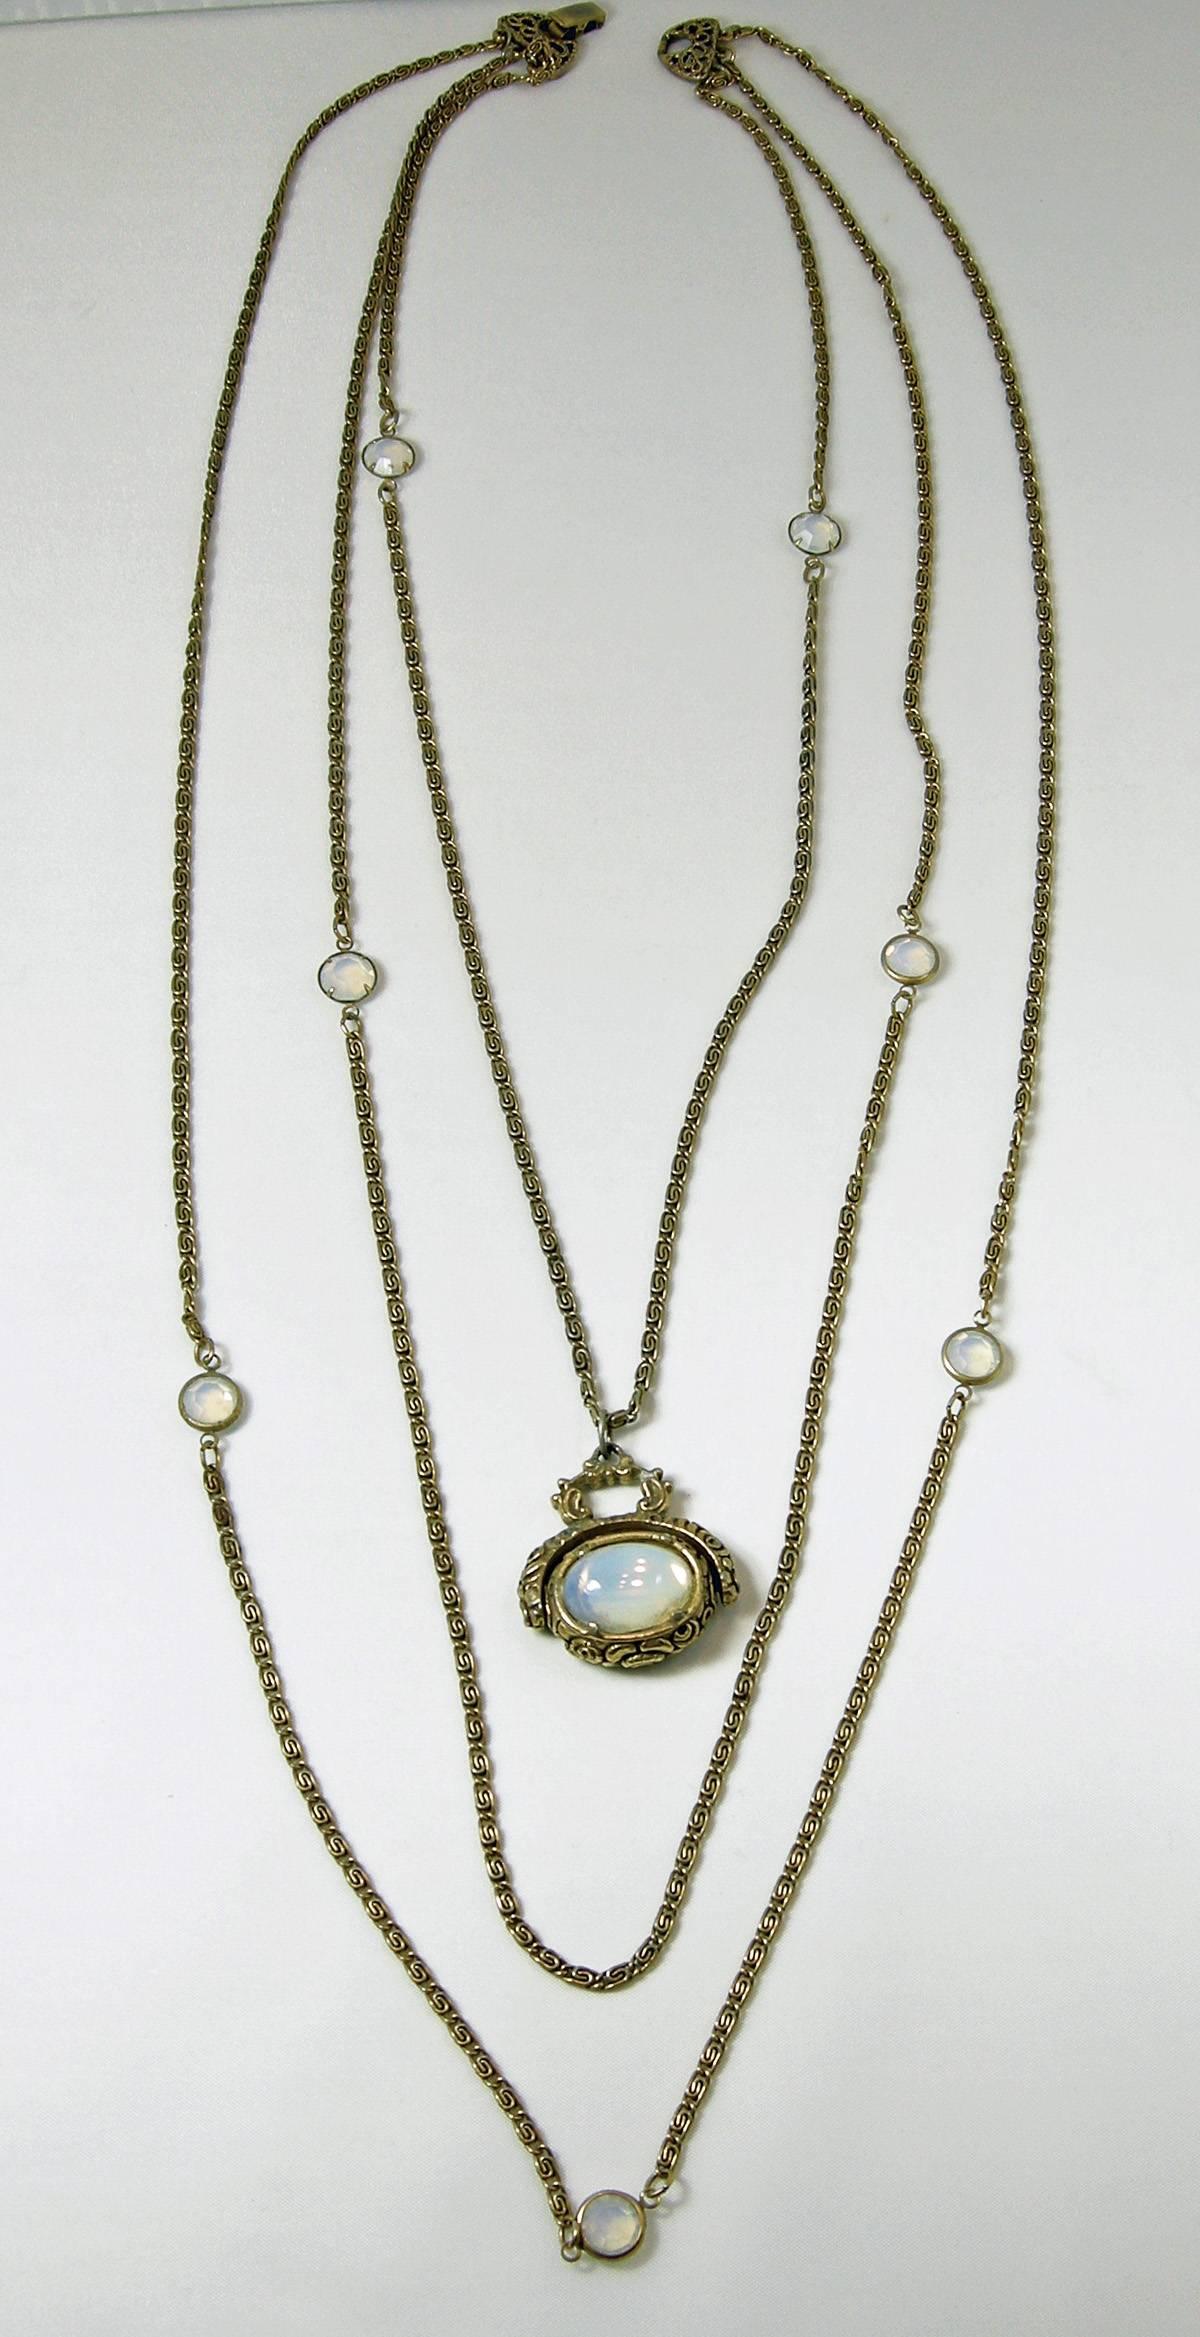 This stunning necklace is designed by Goldette that features a central spinner fob in opalescent glass. The longest chain measures 32, middle chain to longest measures 30”. The shortest measures 24”.  The fob is 1-1/2” x 1-1/4”.  It is in a gold